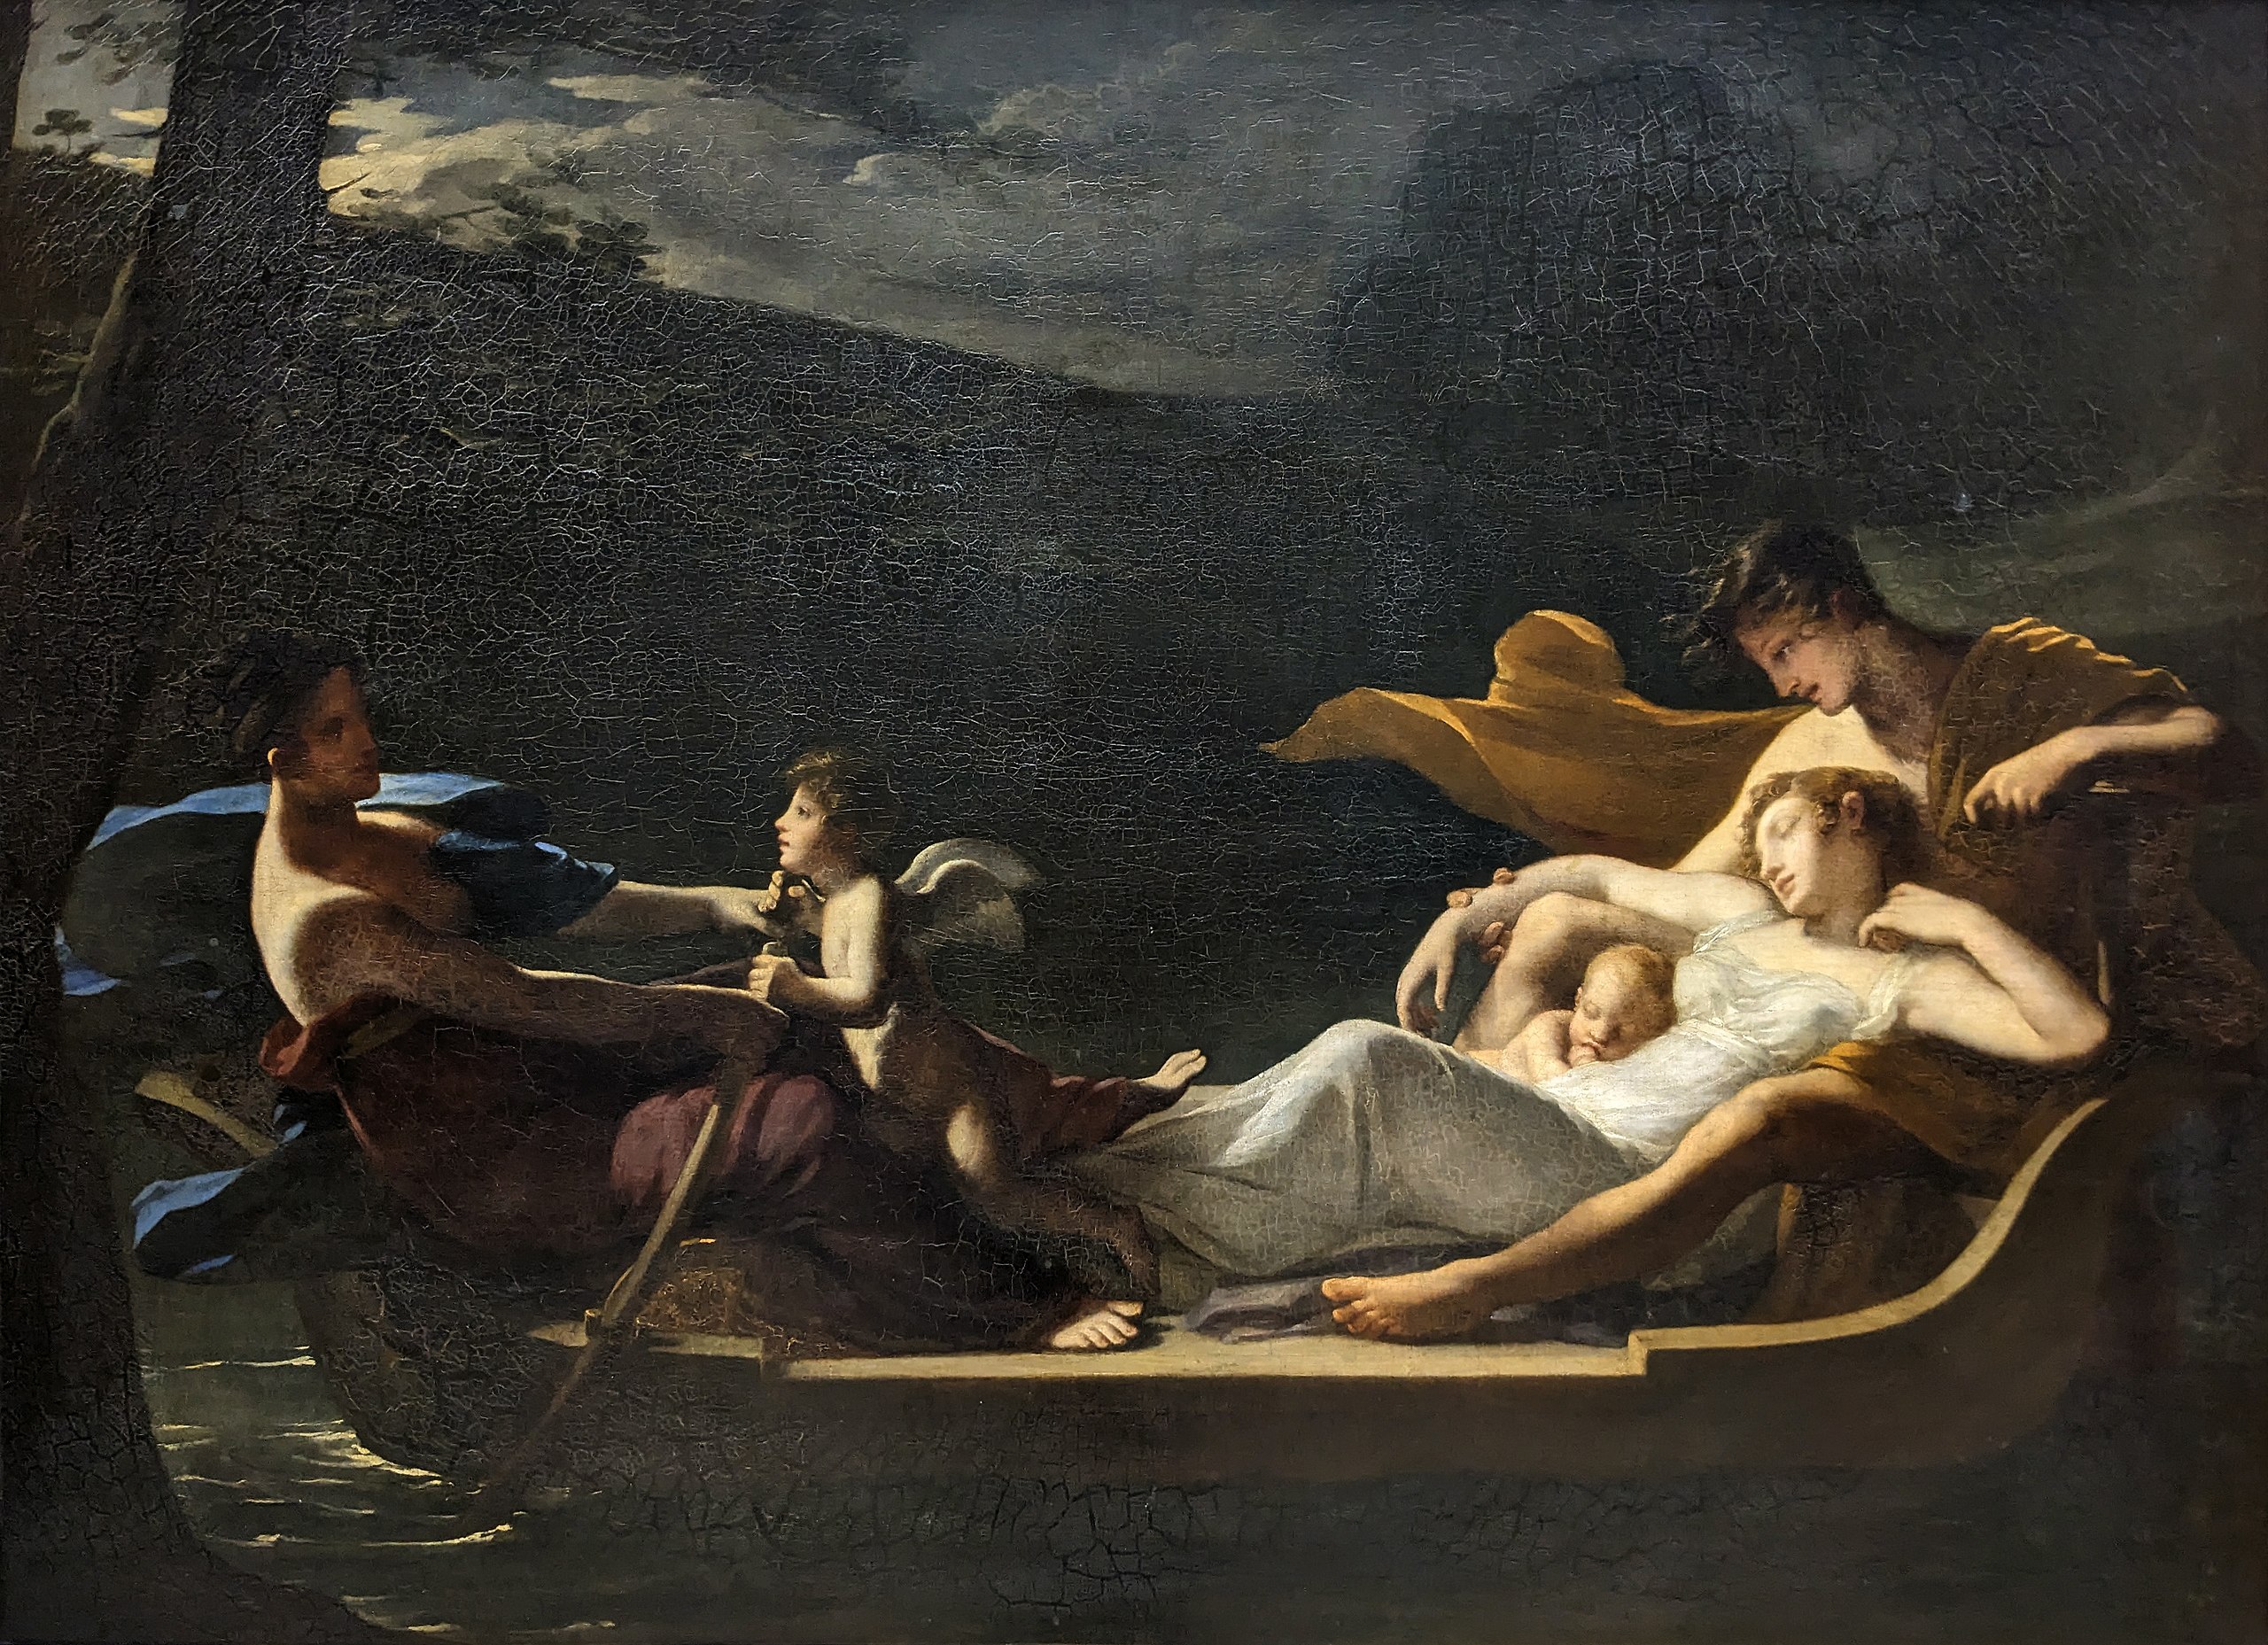 Five figures are on a boat. The figure on the left rows the boat, with an angel helping pull the oars. On the right side of the boat, a woman in a white gown sleeps, leaning back into a robed figure. A baby or angel is tucked next to her, also sleeping. The light is low, as though it is evening or early morning. 